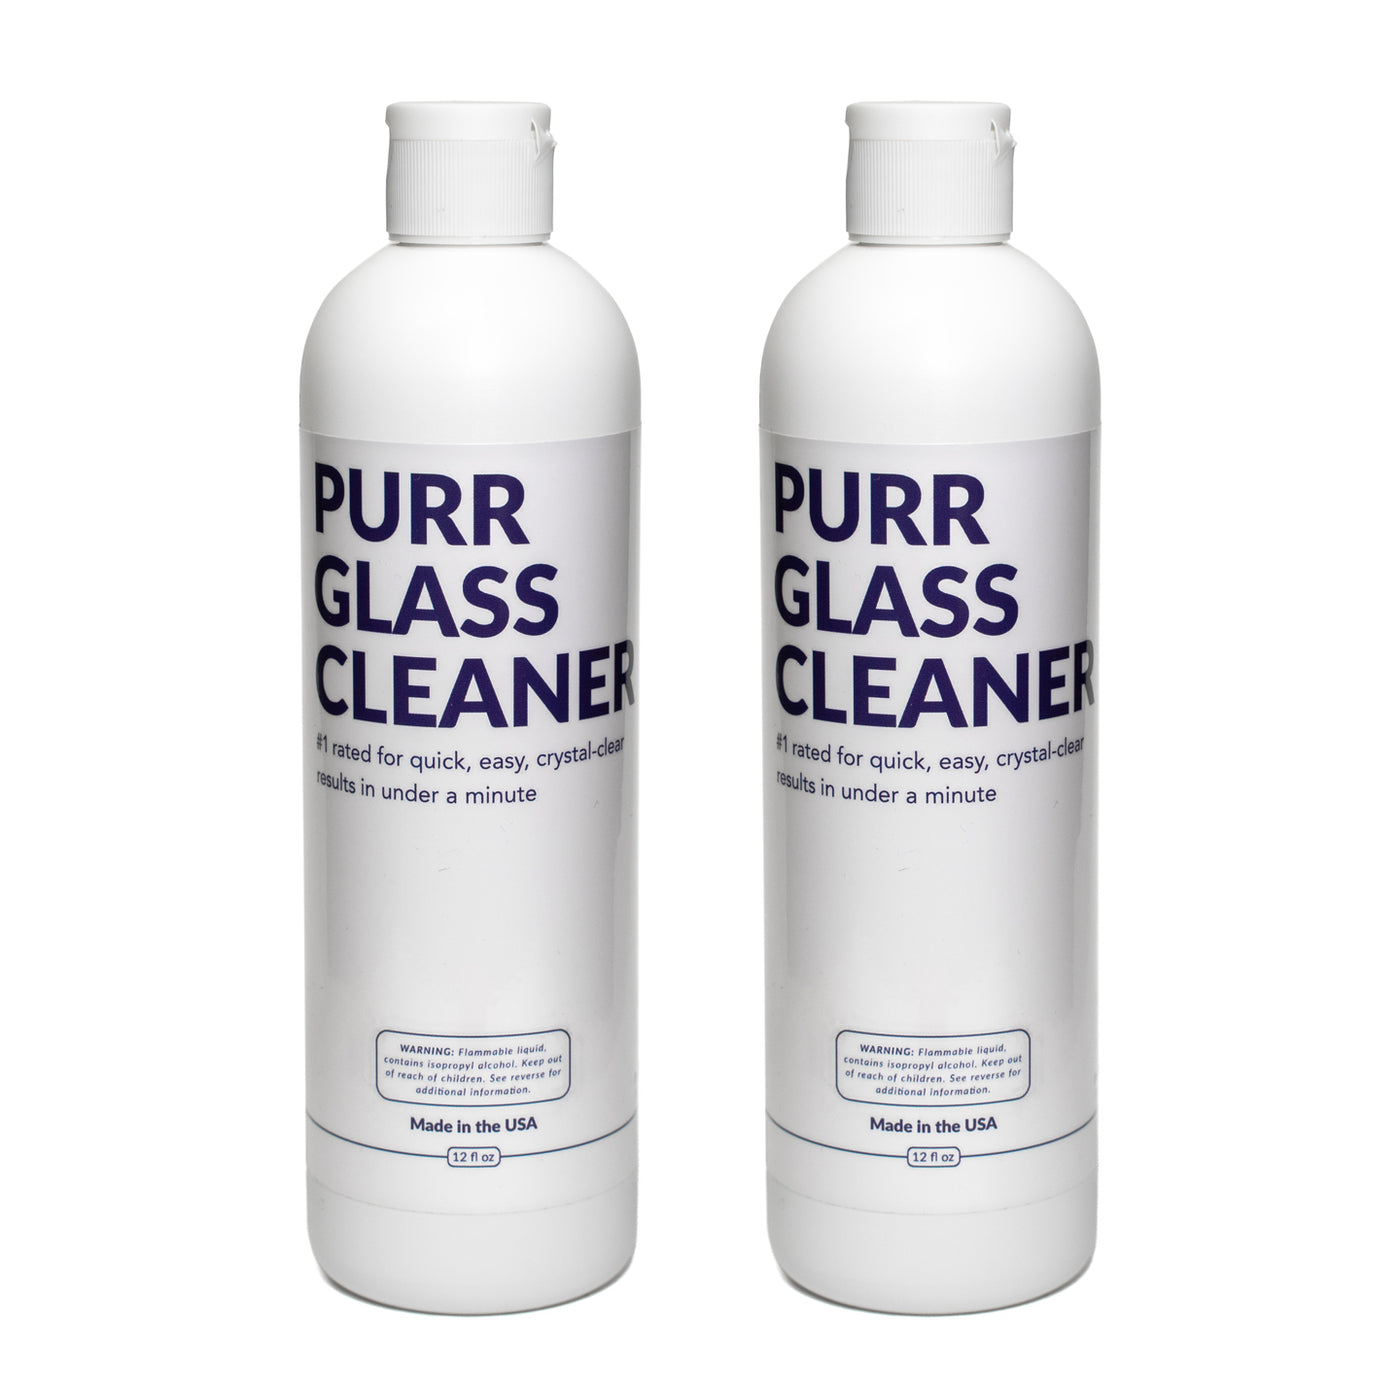 Purr Glass Cleaner